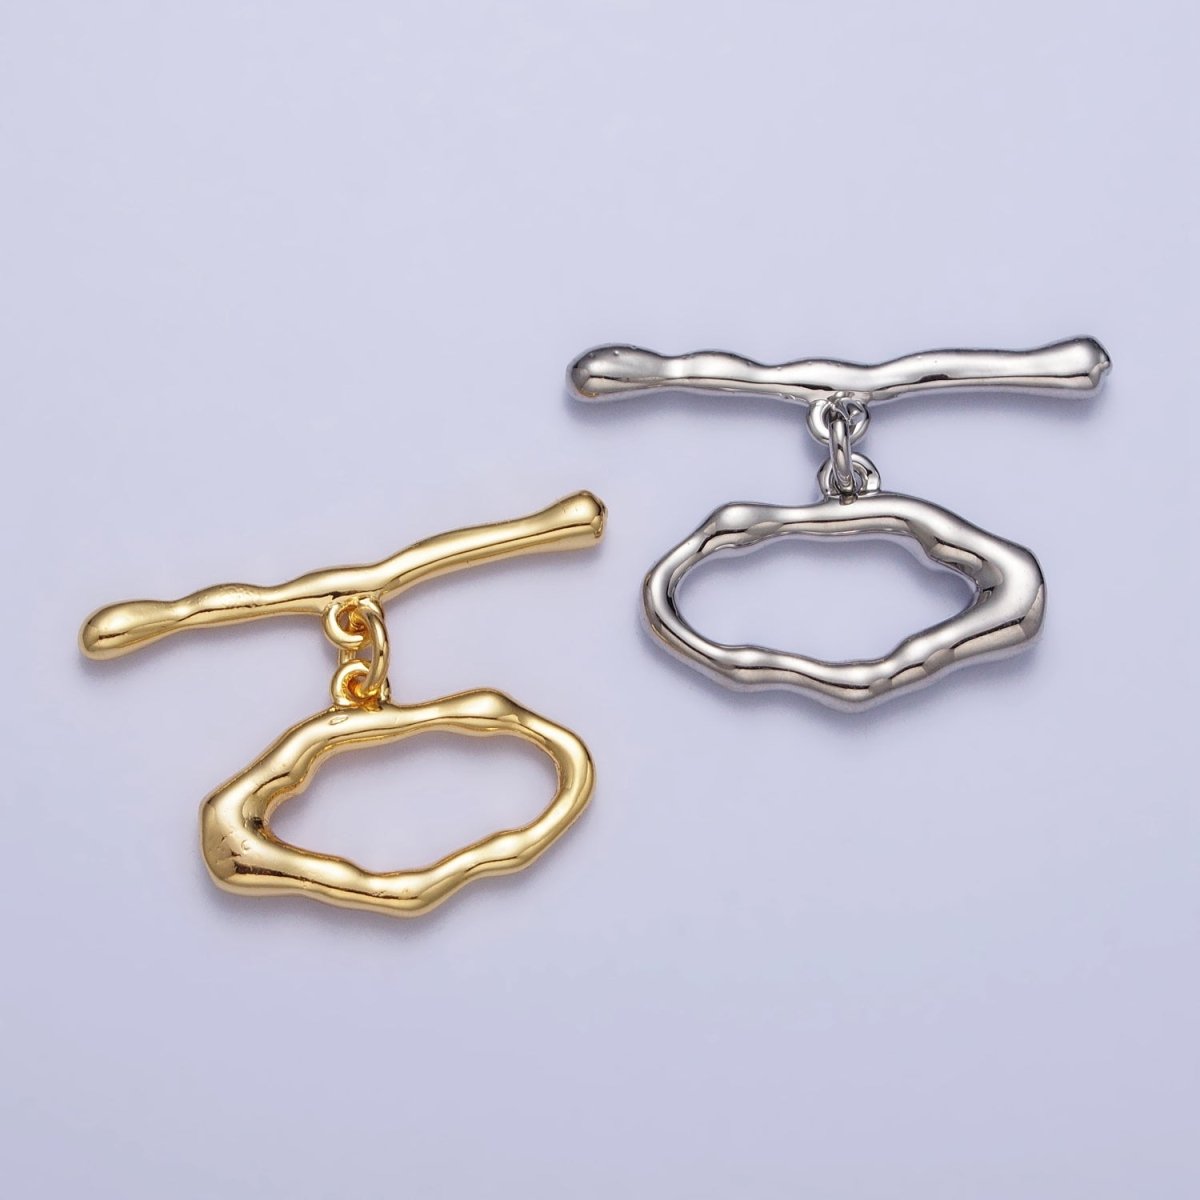 Gold Filled Geometric Abstract Toggle Clasps in Gold & Silver Jewelry Closure Supply | Z-098 Z-099 - DLUXCA